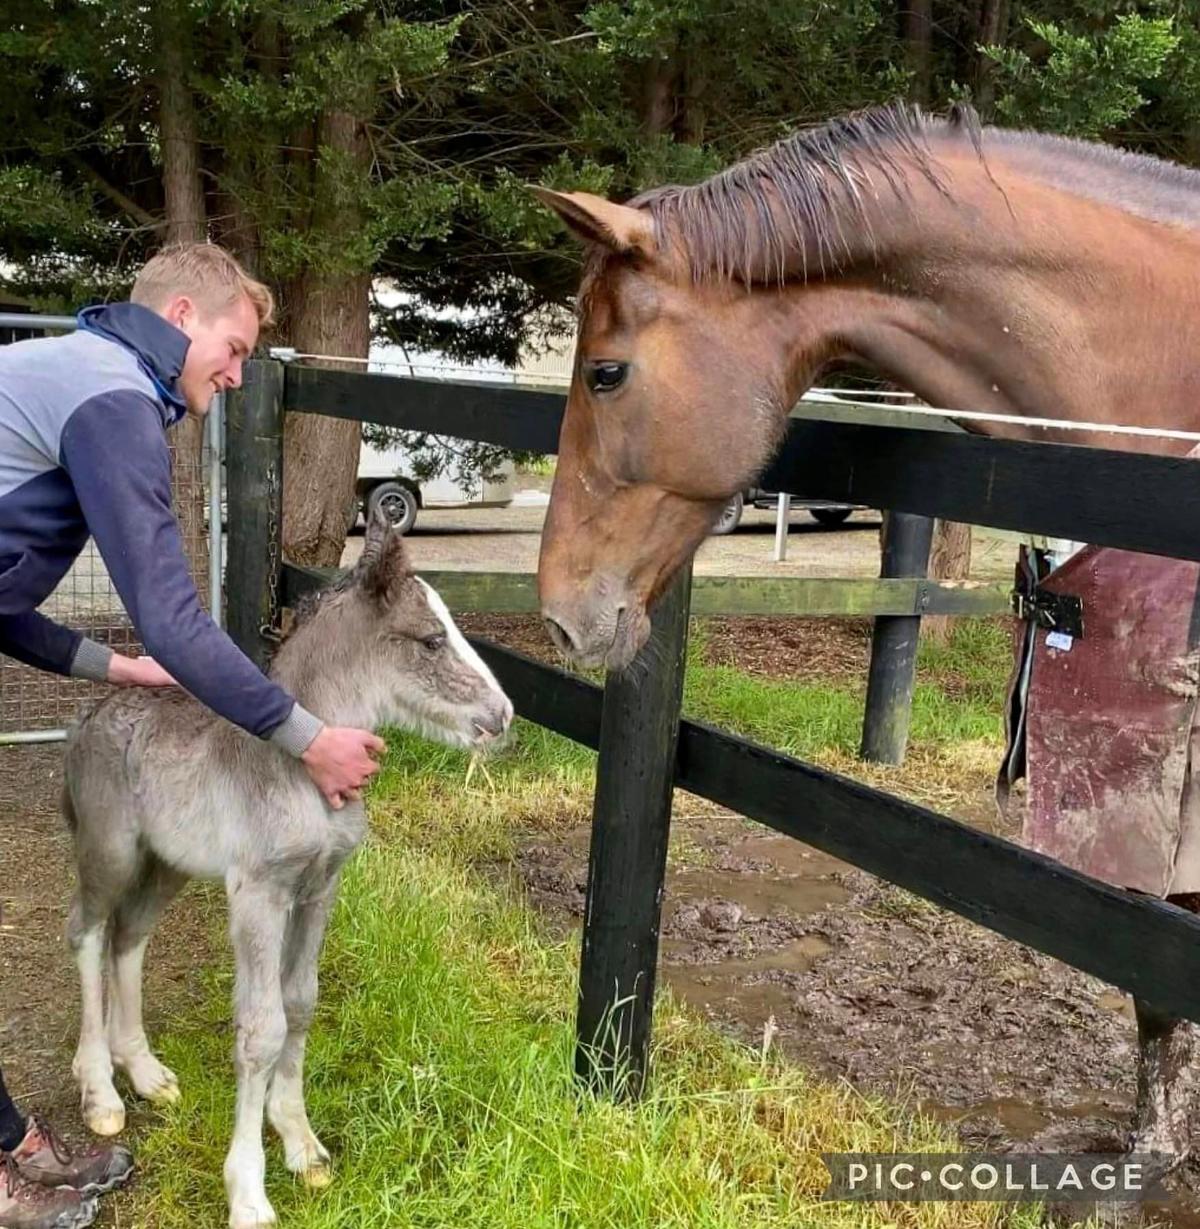 Jazzy is introduced to the abandoned gypsy cob colt for the first time. (Courtesy of <a href="https://www.facebook.com/sarah.brayshaw.3" target="_blank" rel="noopener">Sarah Brayshaw</a>, Louisa Smith and <a href="https://www.facebook.com/profile.php?id=100008144736098">Leigh Church</a>)